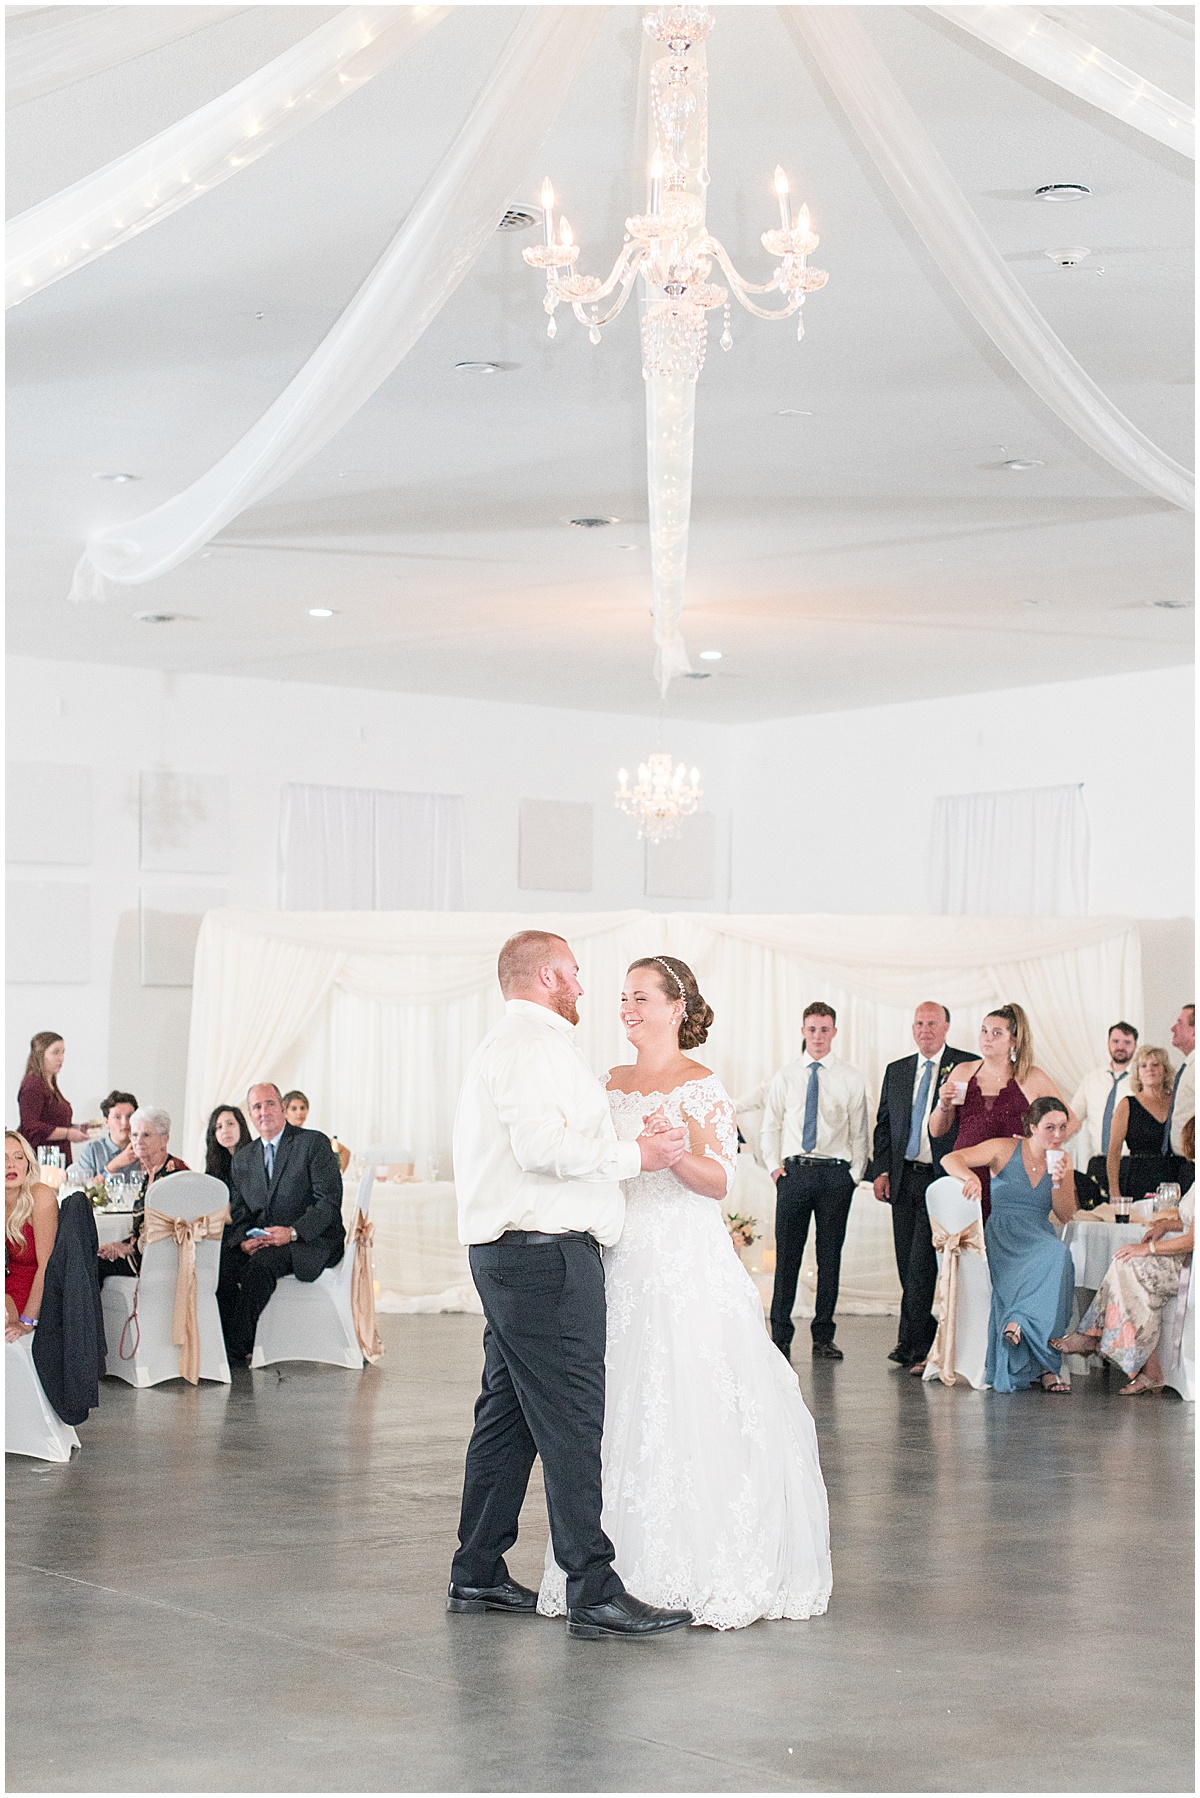 First dance photos at Meadow Springs Manor wedding in Francesville, Indiana